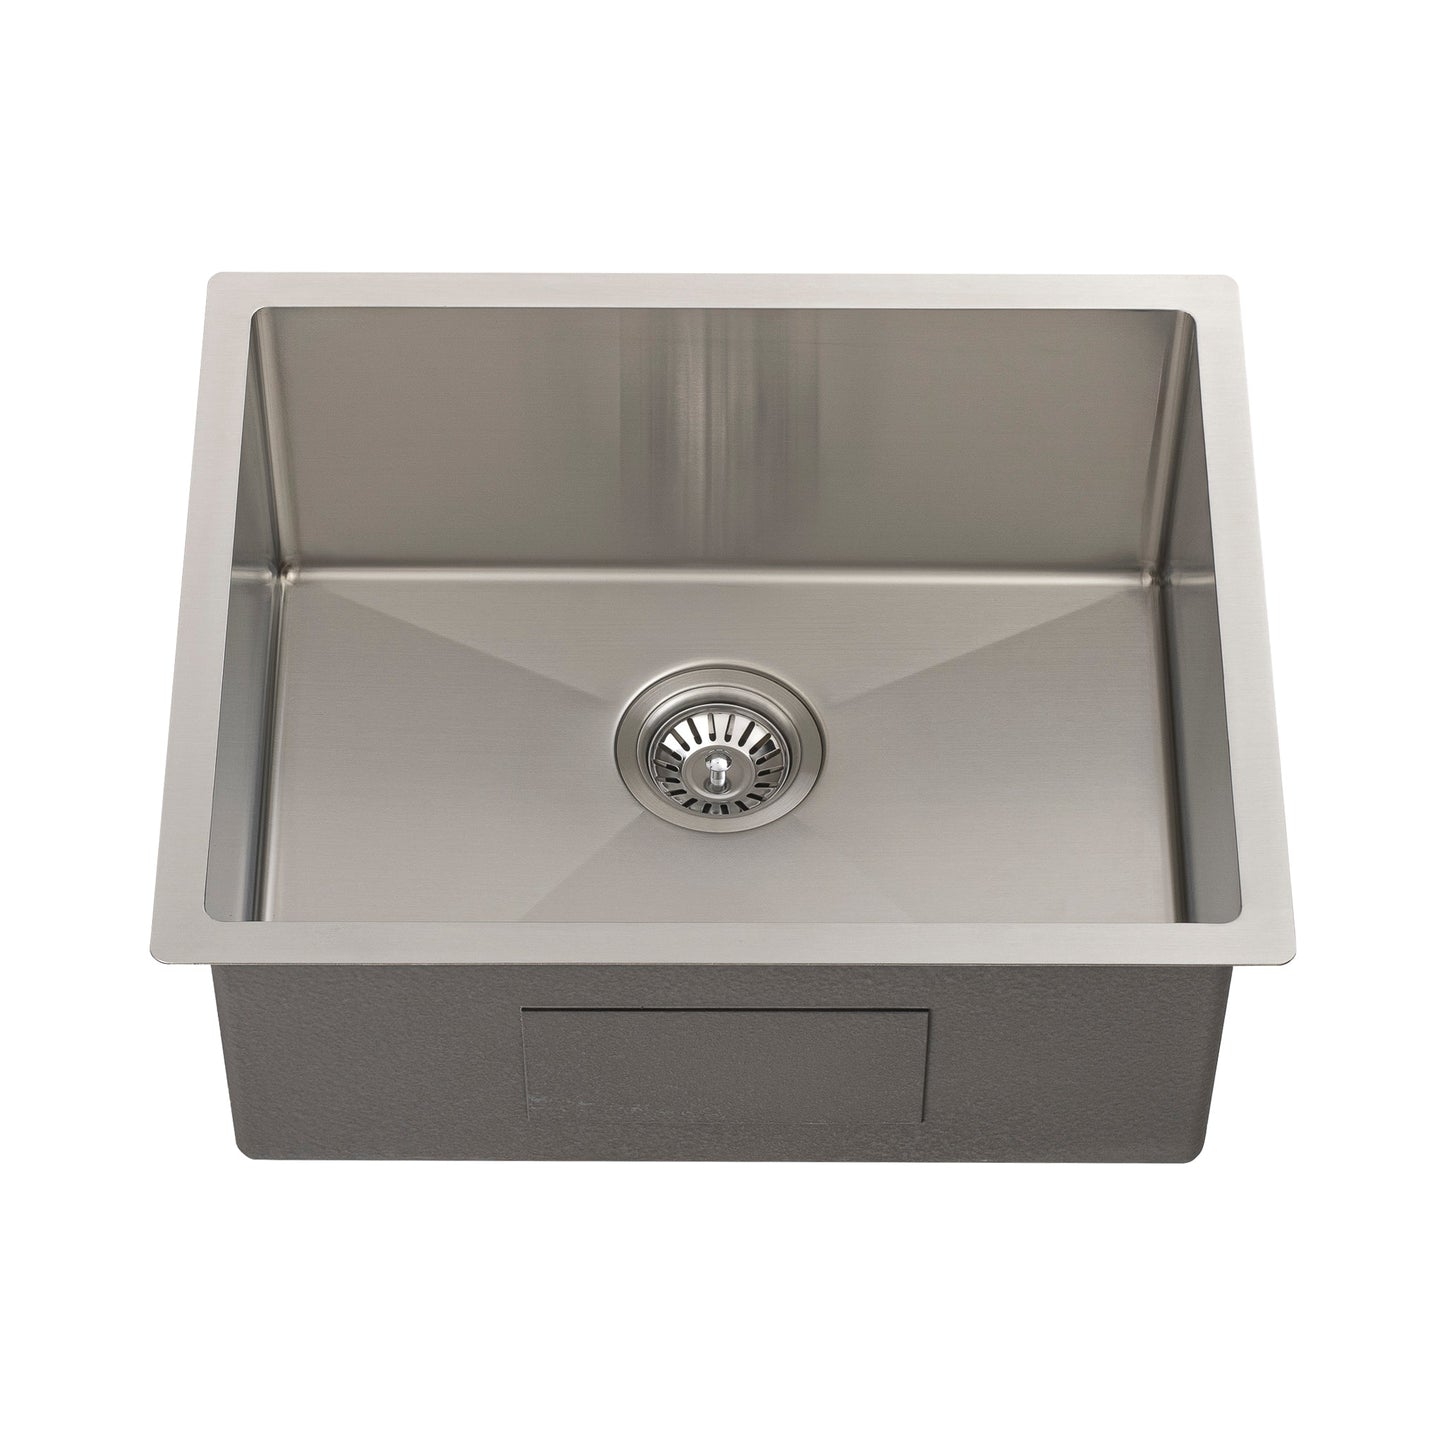 Retto II 550mm x 450mm x 230mm Stainless Steel Sink, Brushed Nickel Silver